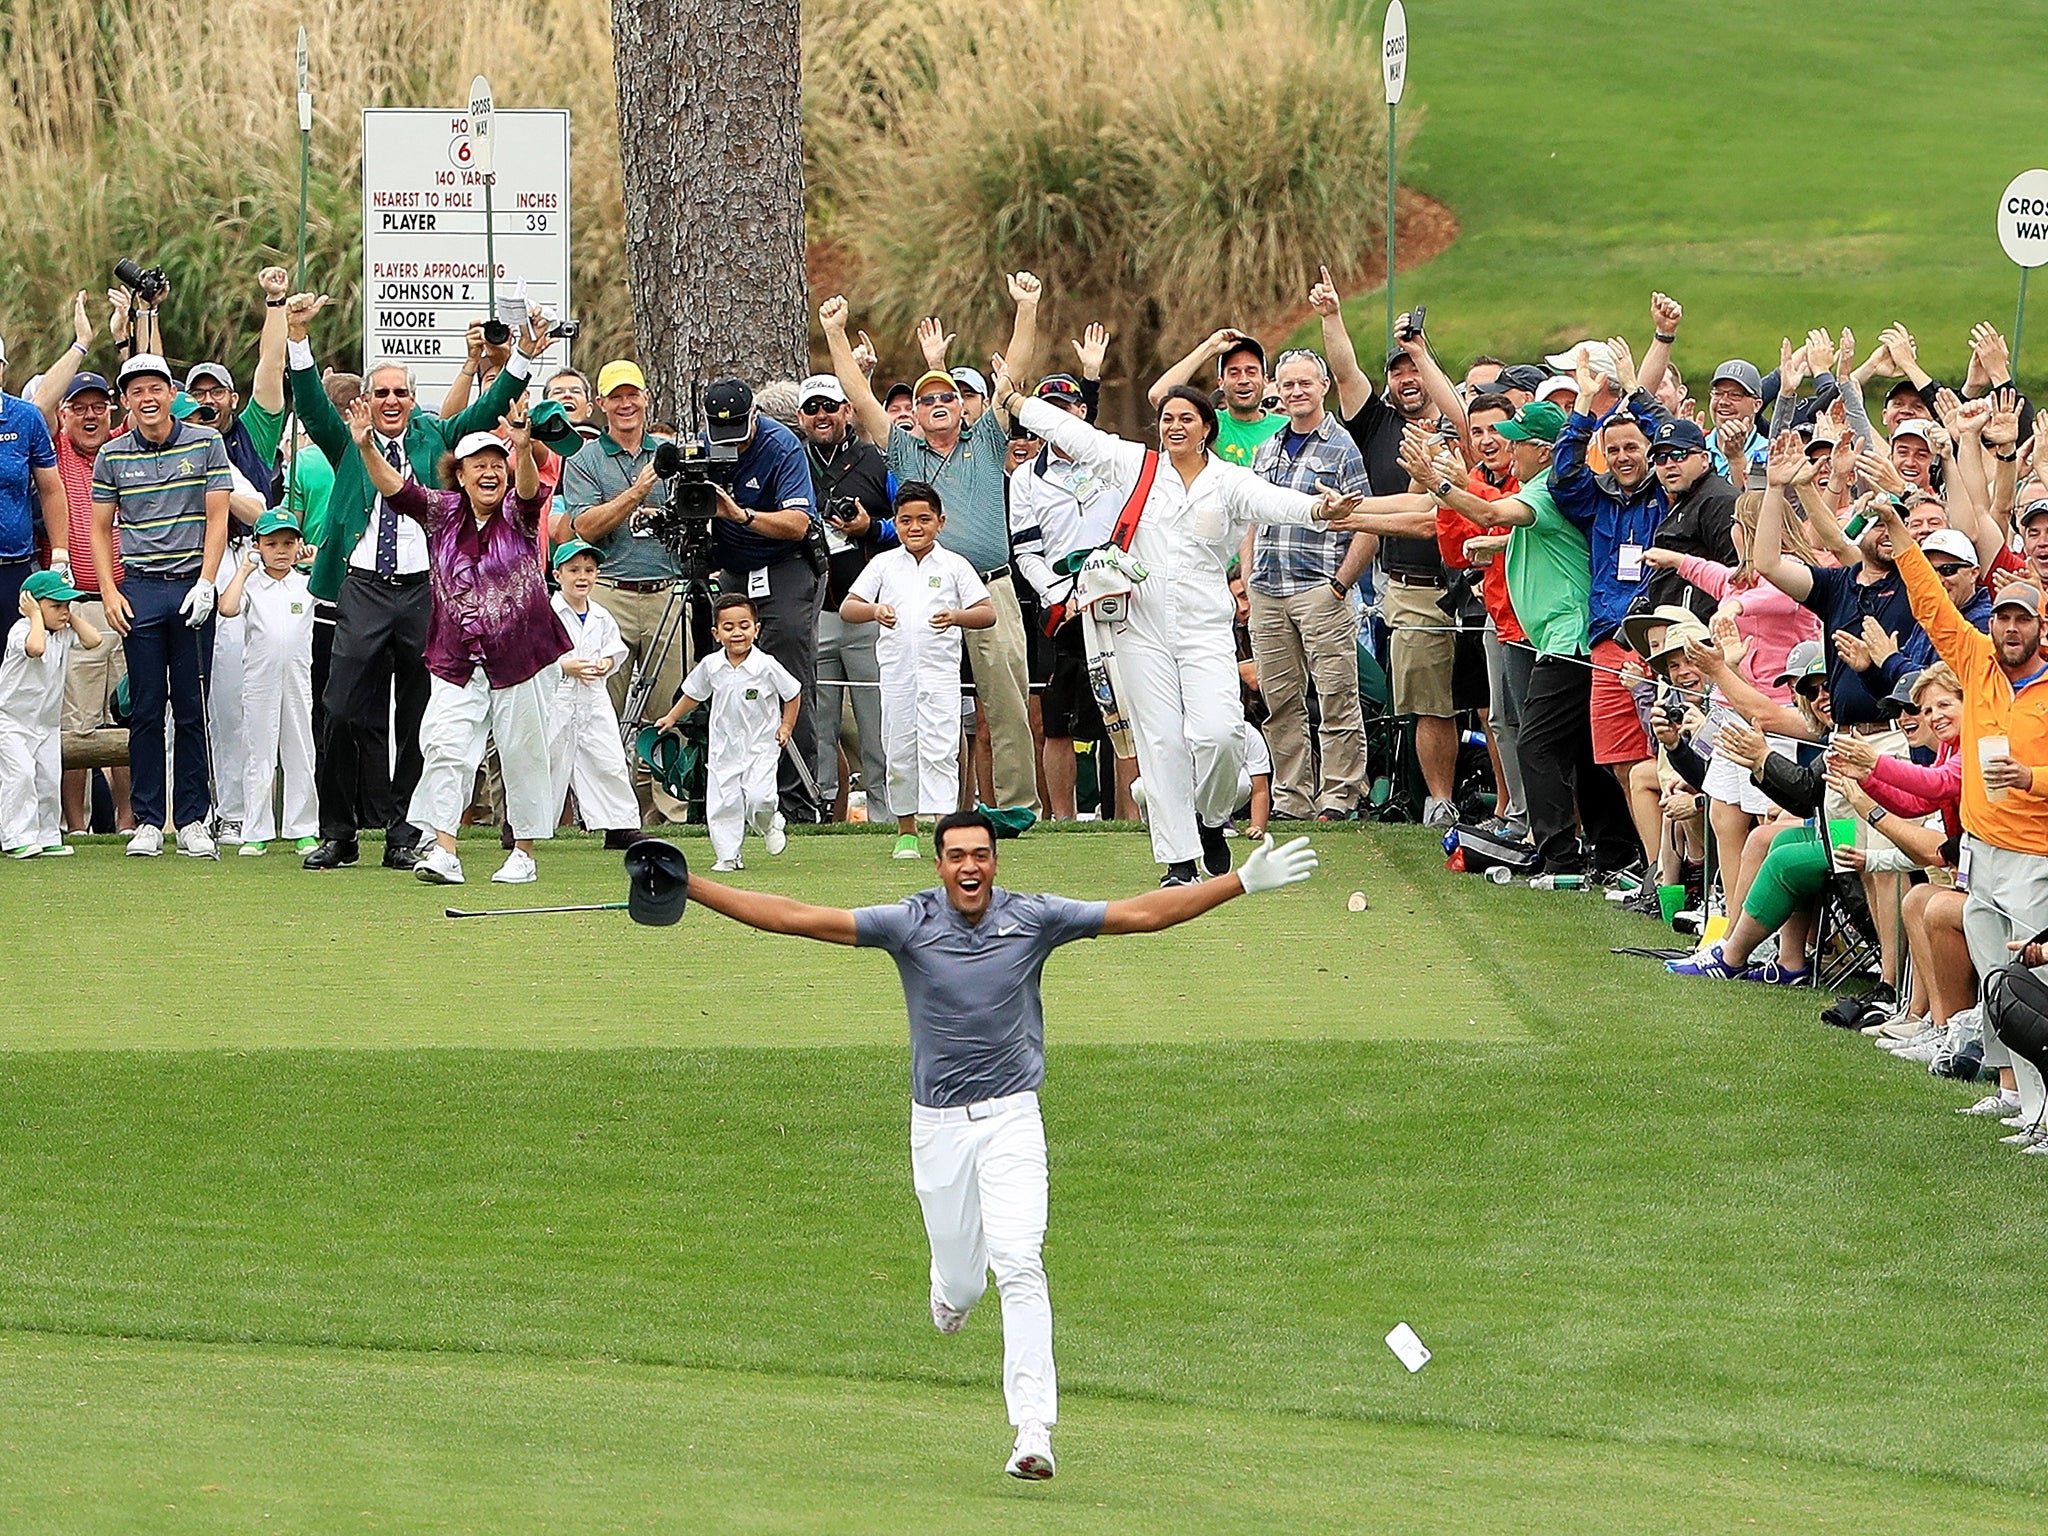 Finau sprinted down the fairway to celebrate his hole-in-one